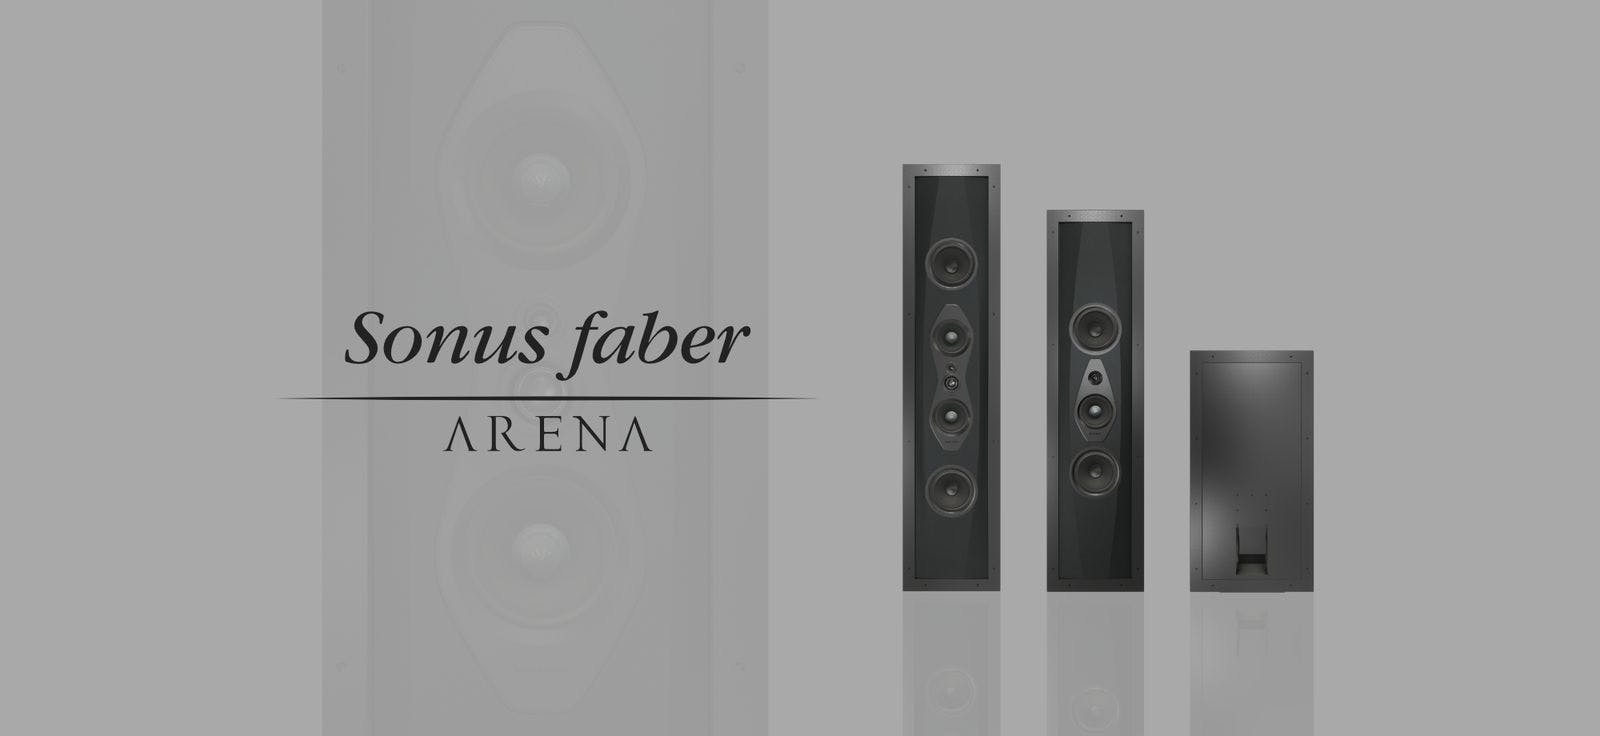 World debut for Sonus faber’s Arena at CEDIA 2022